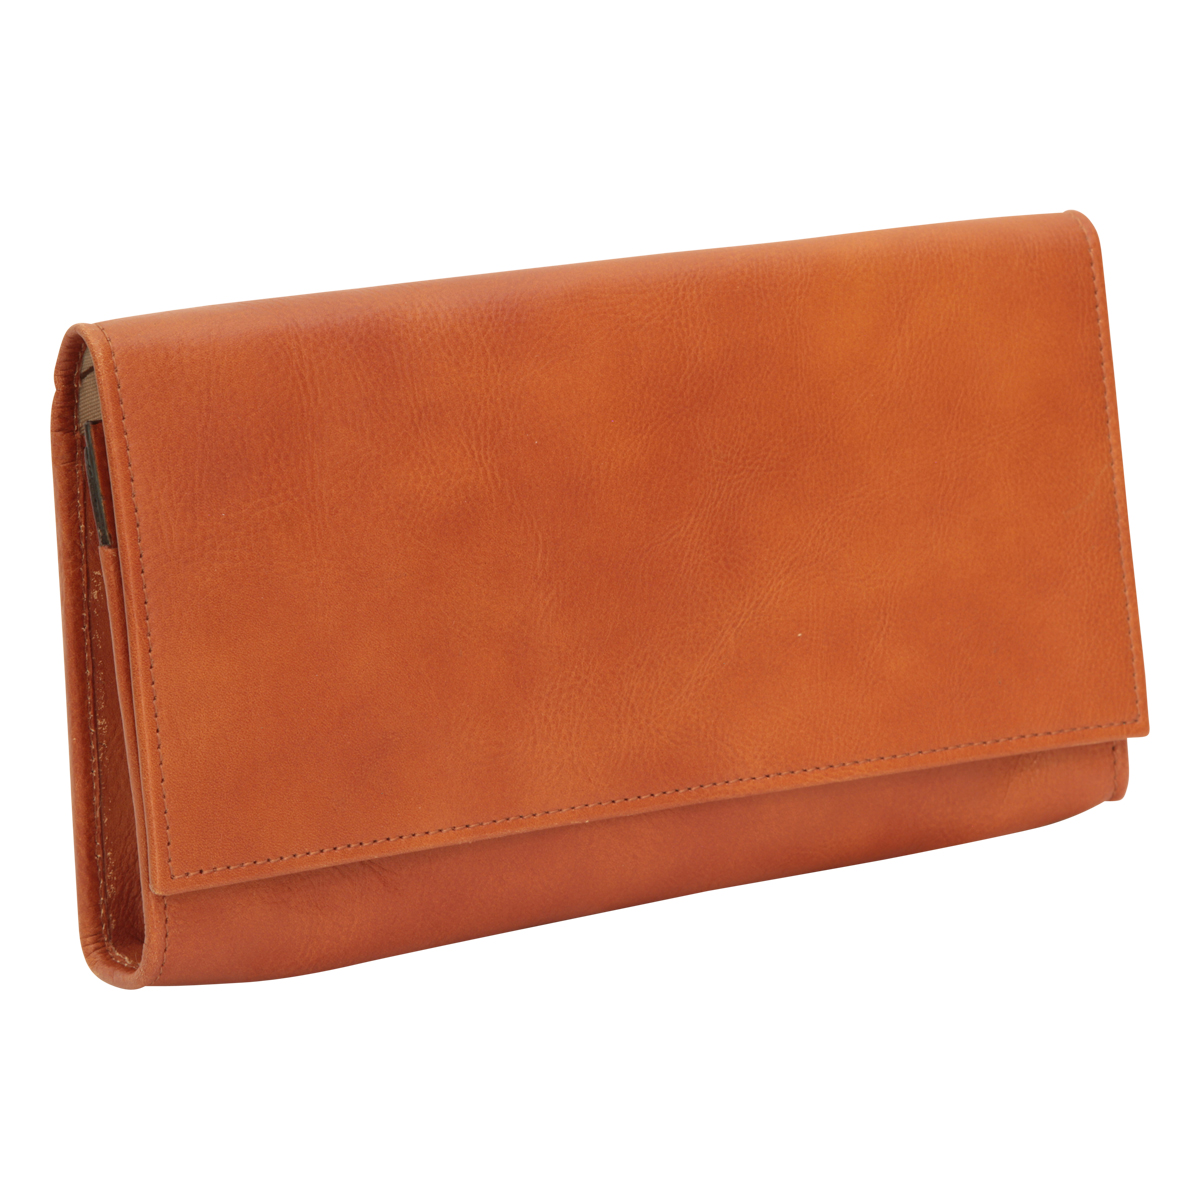 Leather Portfolio - Colonial | 553889CO US | Old Angler Firenze